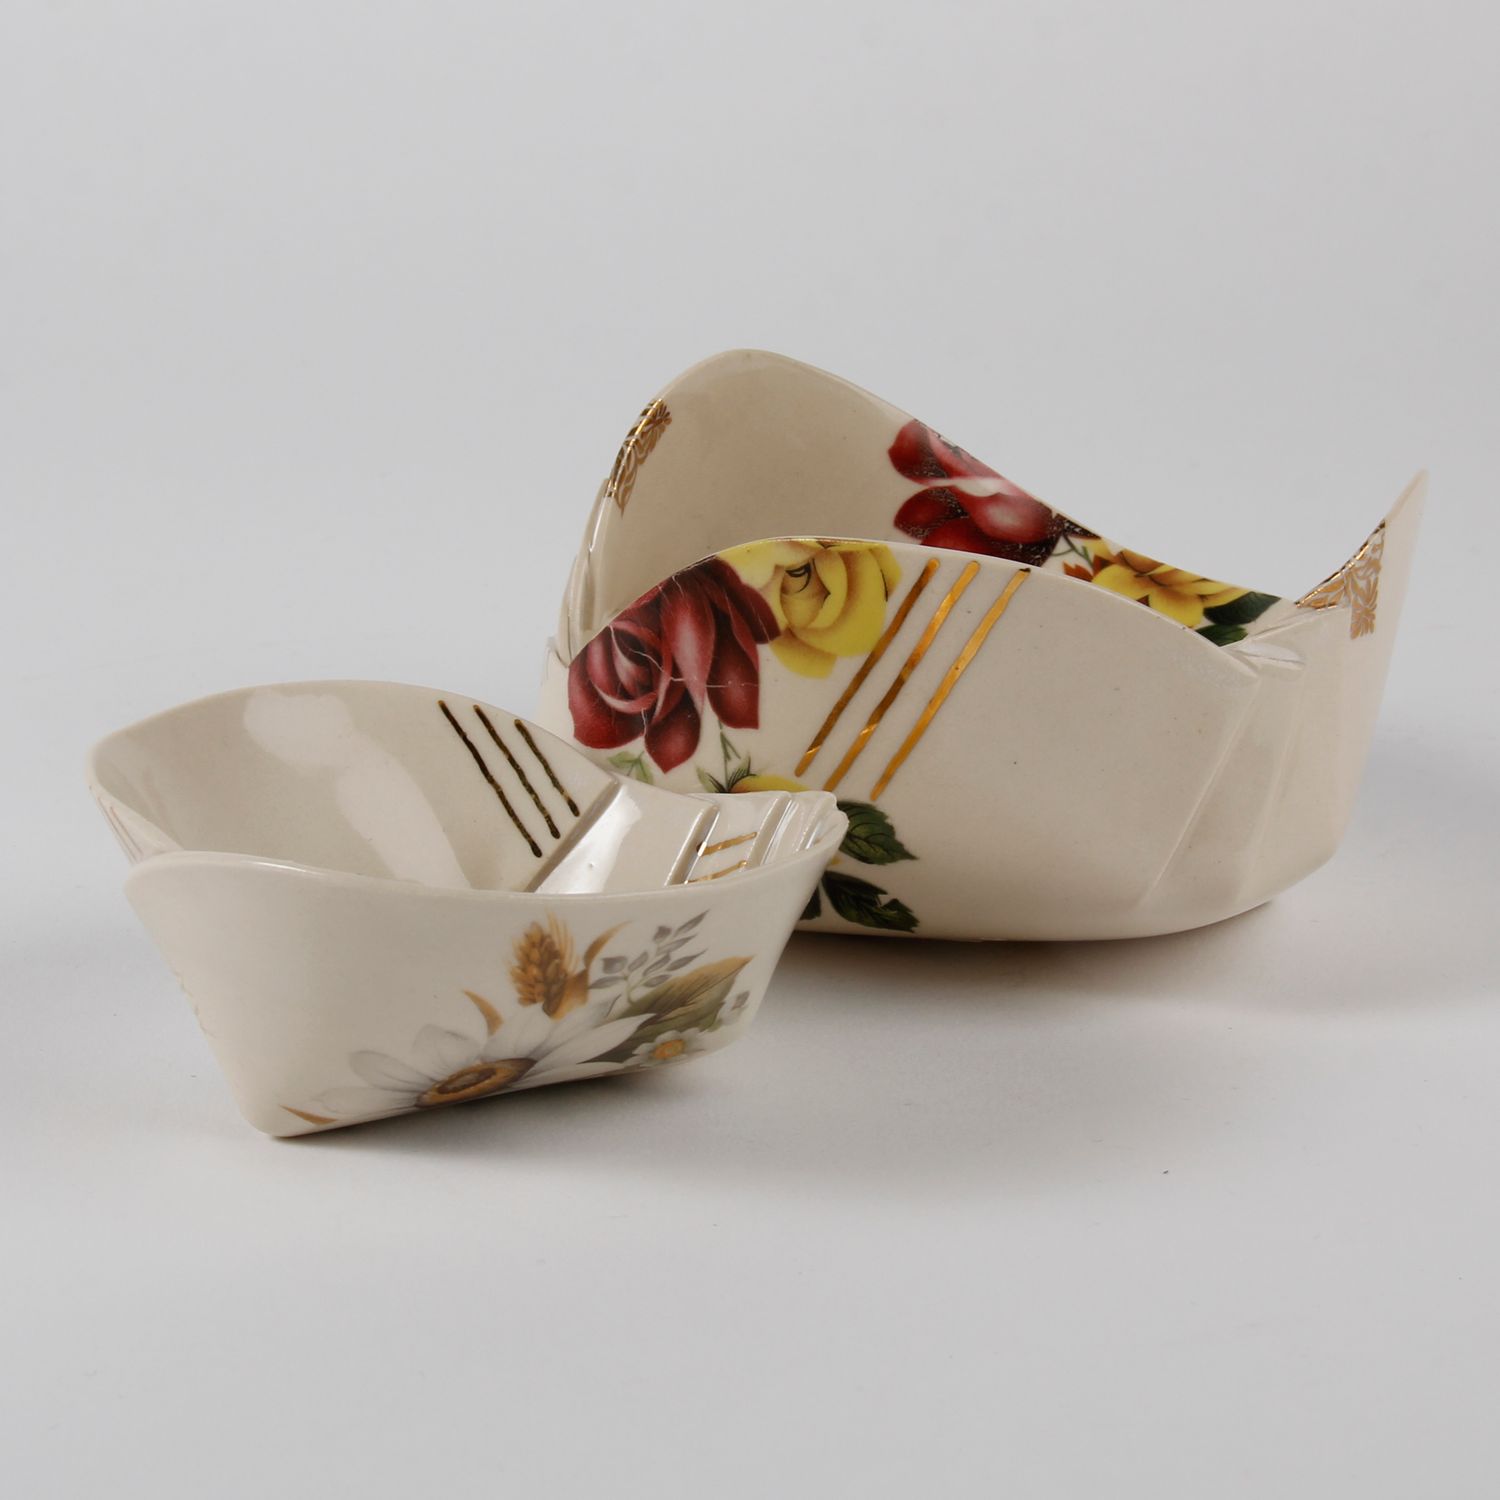 Natalie Waddell: X-Large Floral Bowl Product Image 2 of 7